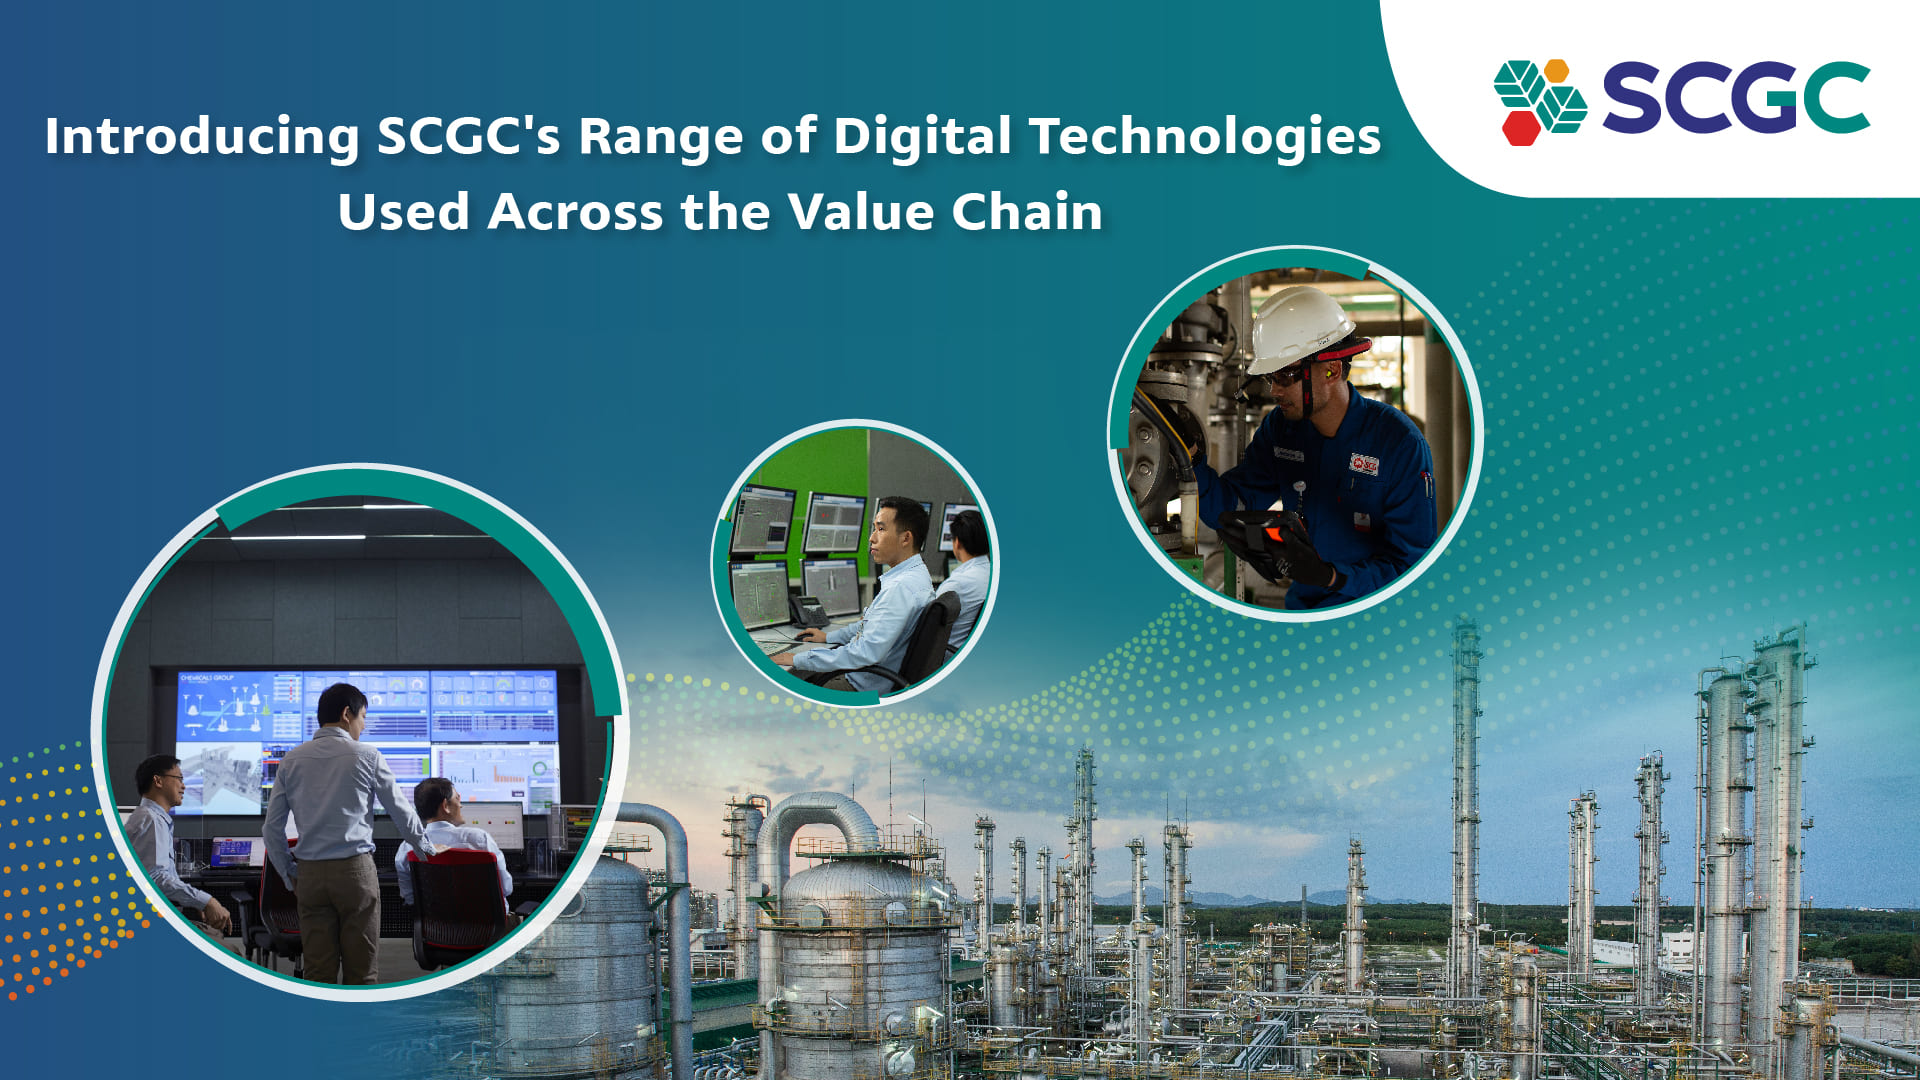 Introducing SCGC’s Range of Digital Technologies Used Across the Value Chain